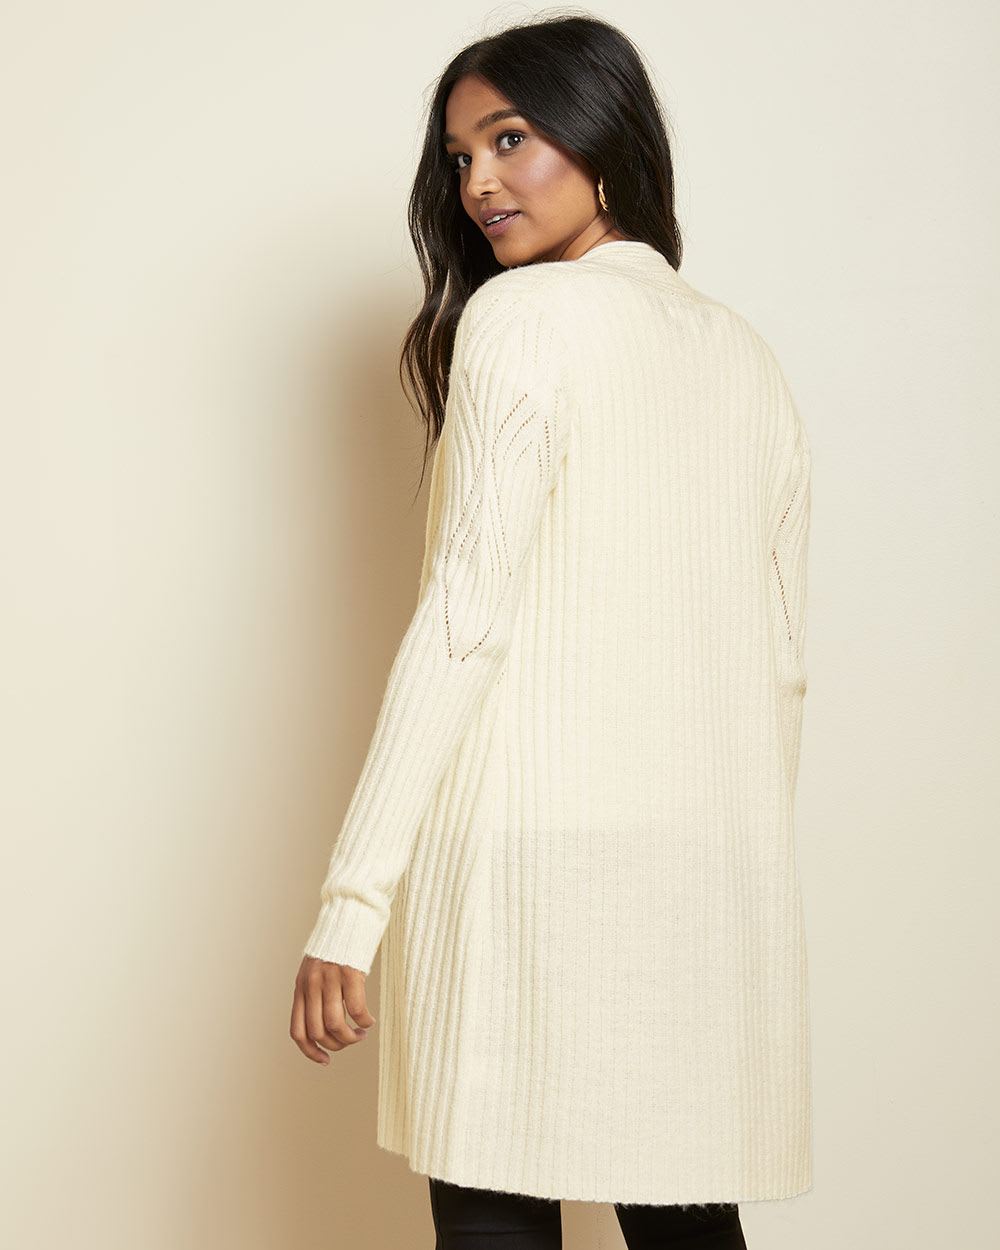 C&G Spongy knit Open-front cardigan with pointelle | RW&CO.